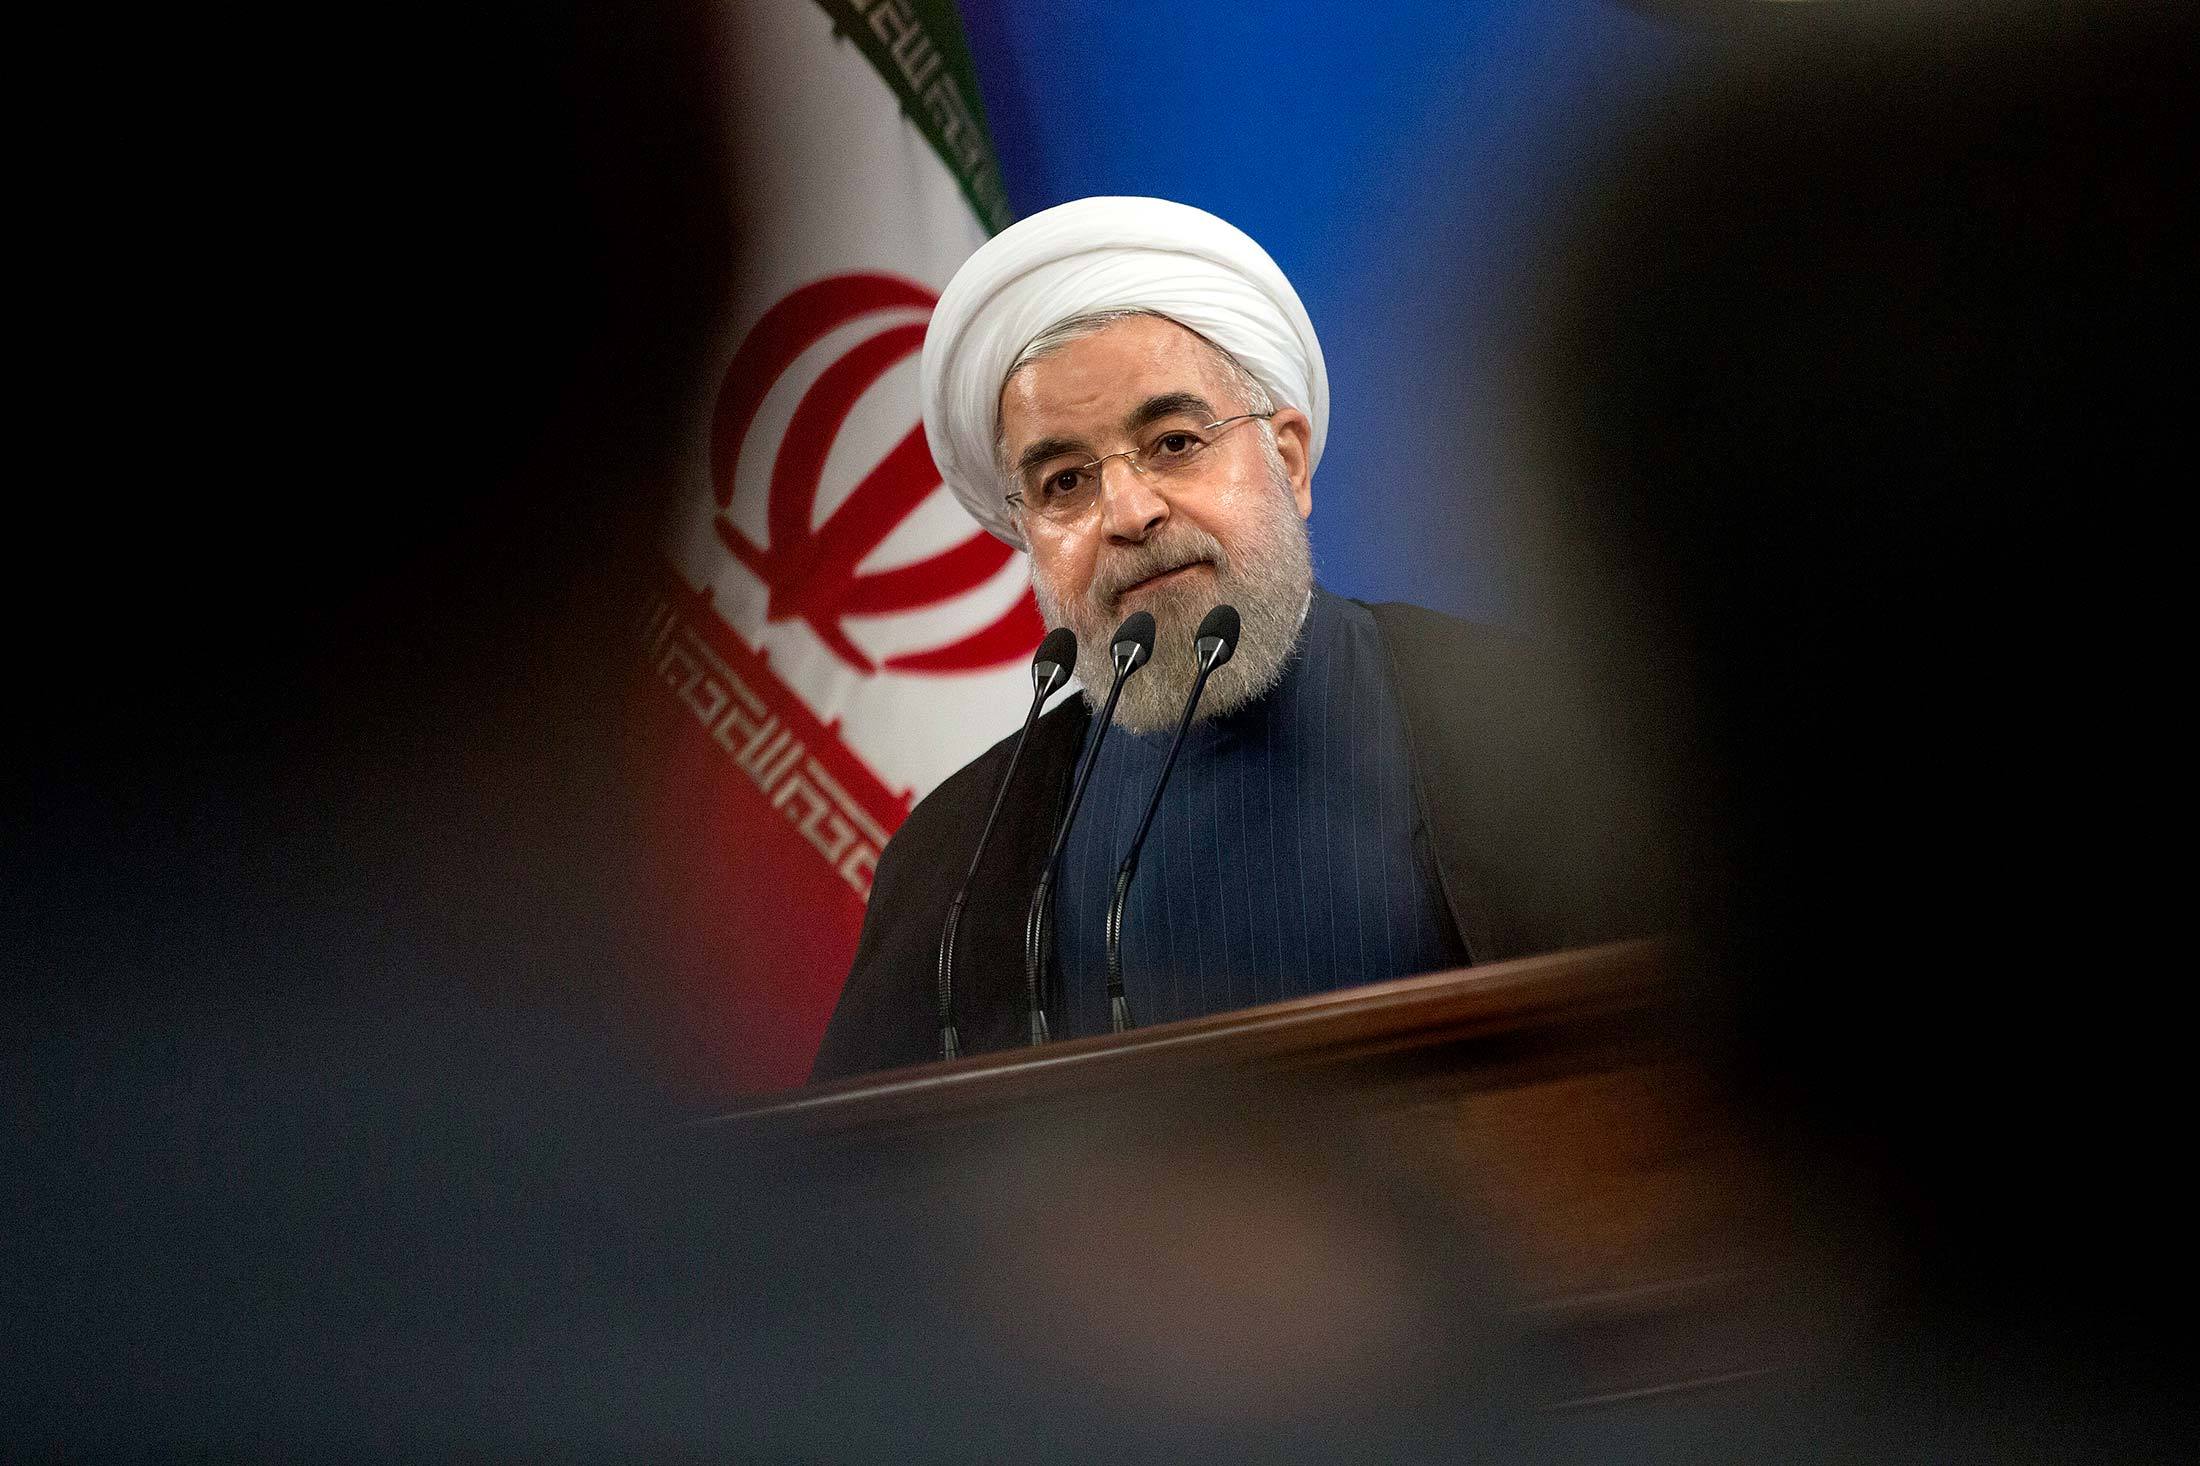 Rouhani Raises Iran’s Standing at UN as Criticism Grows at Home